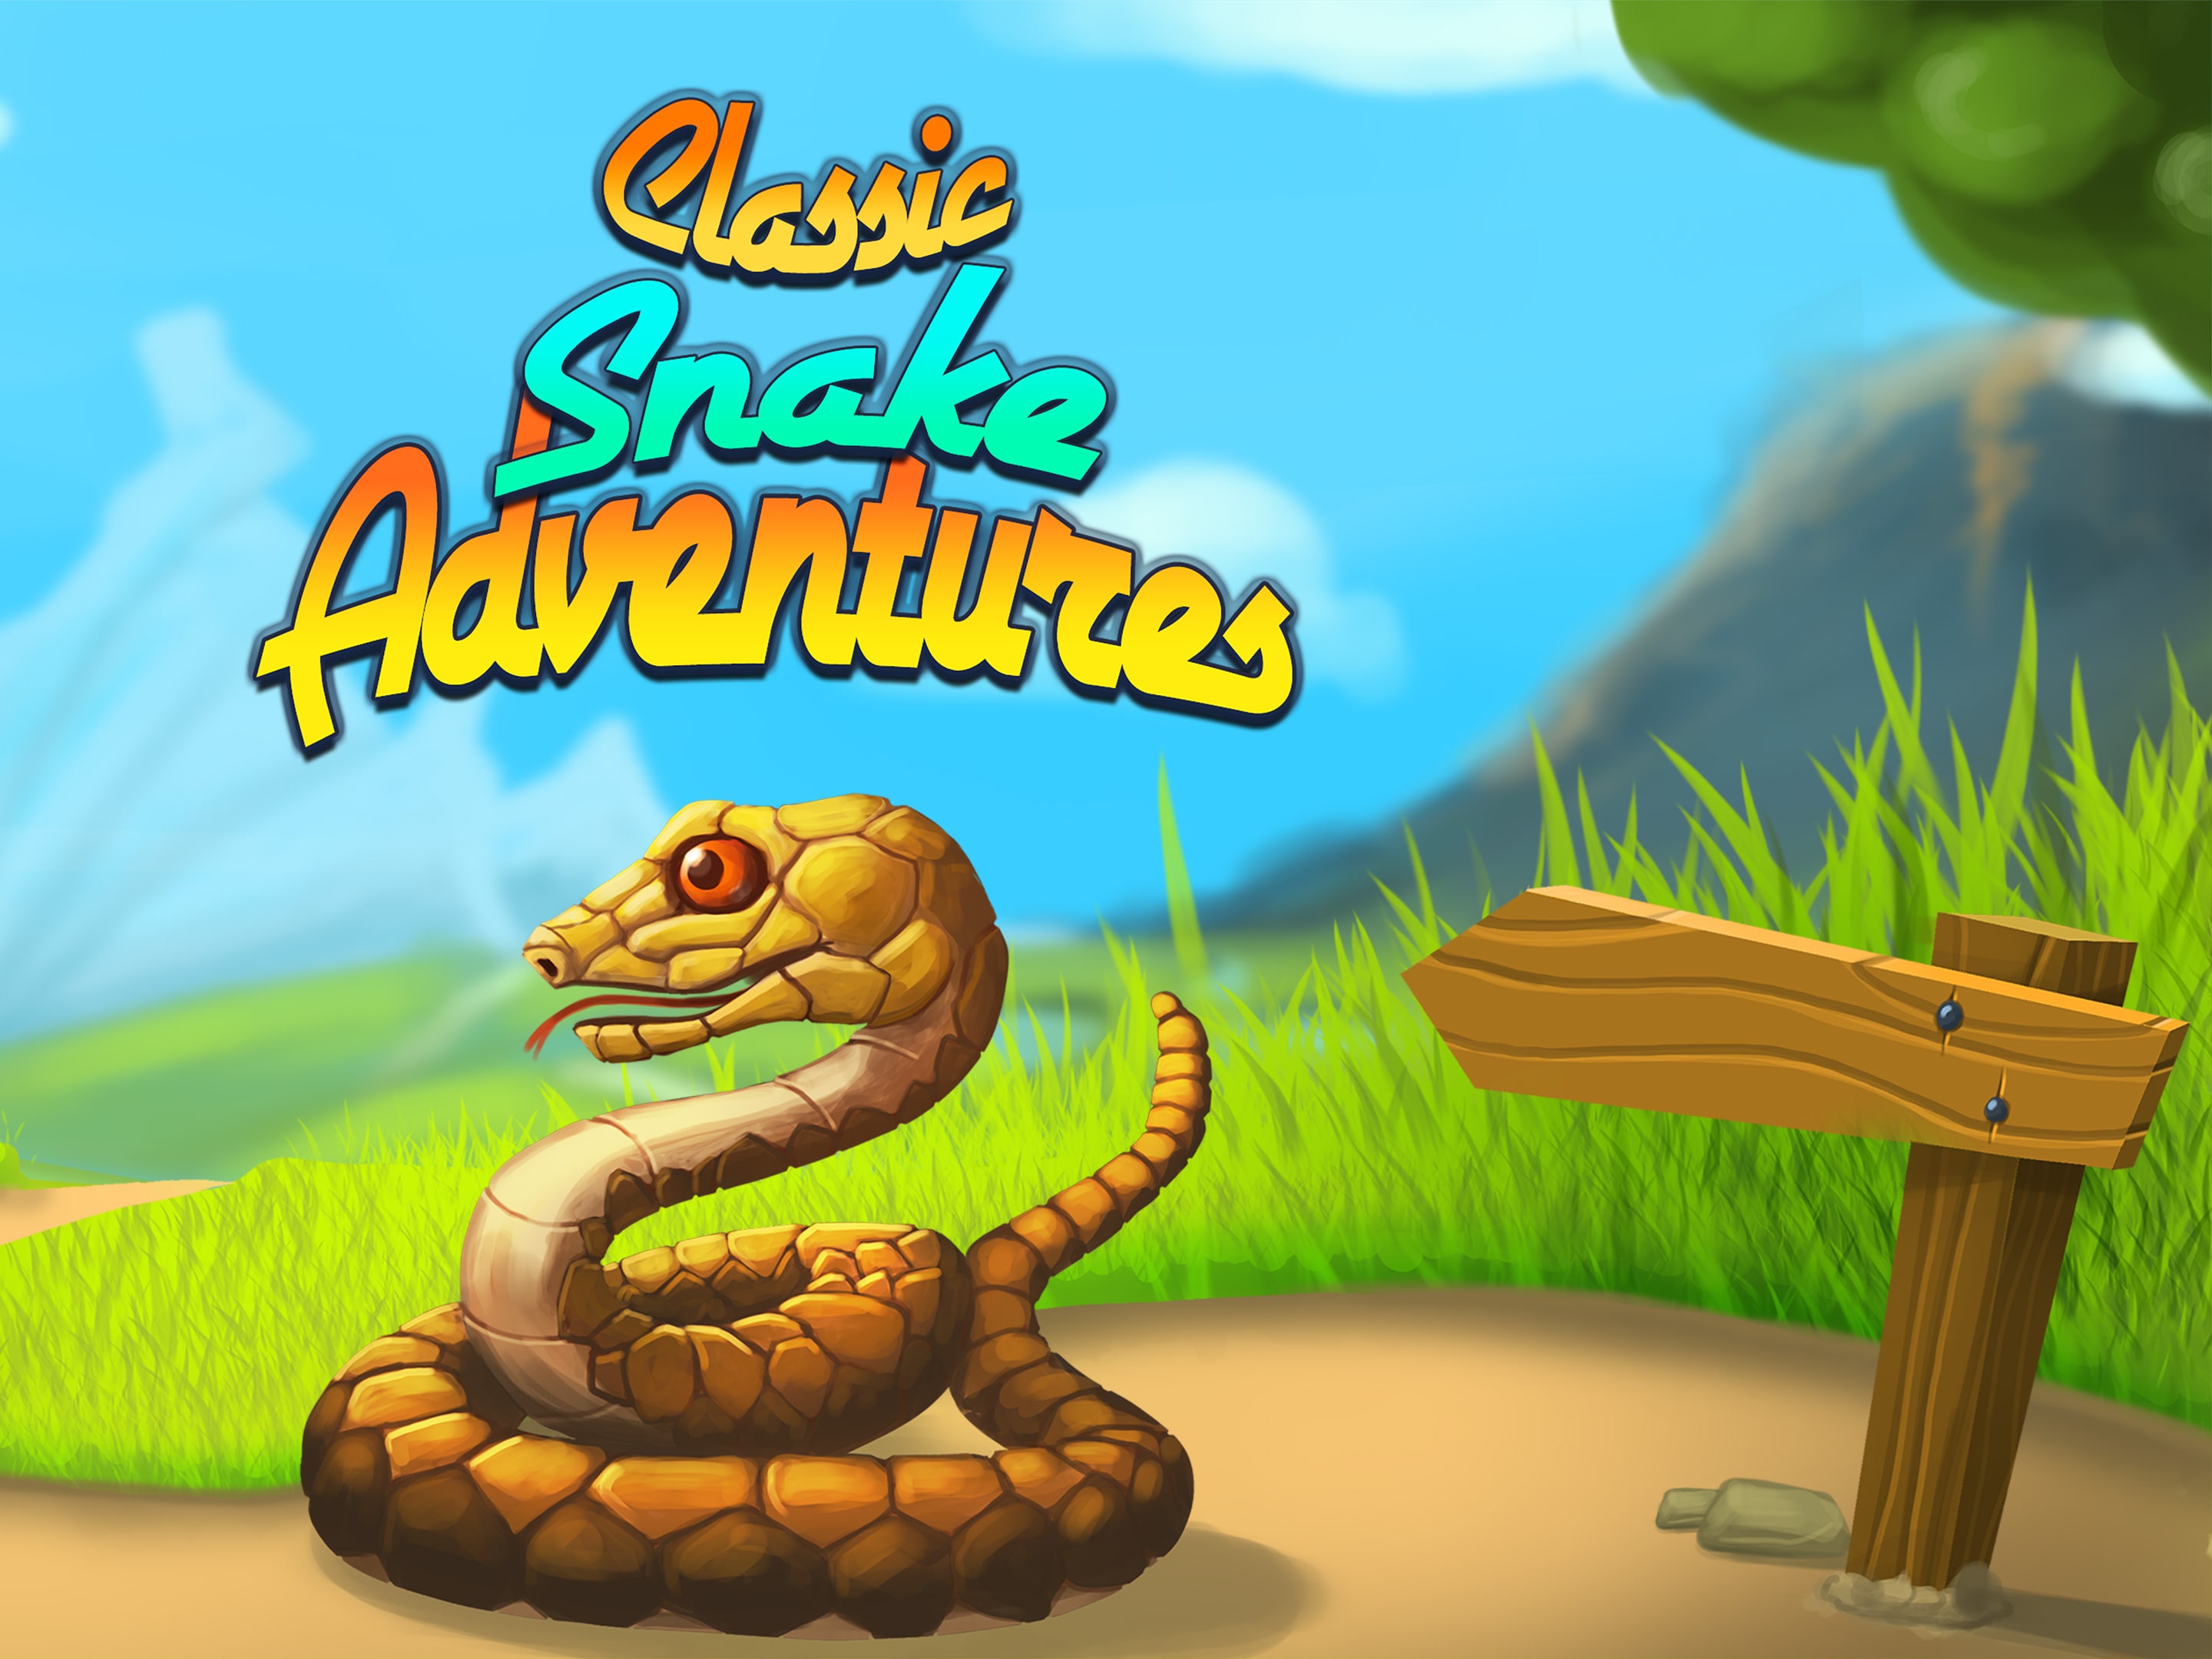 Classic Snake Adventures for Nintendo Switch - Nintendo Official Site